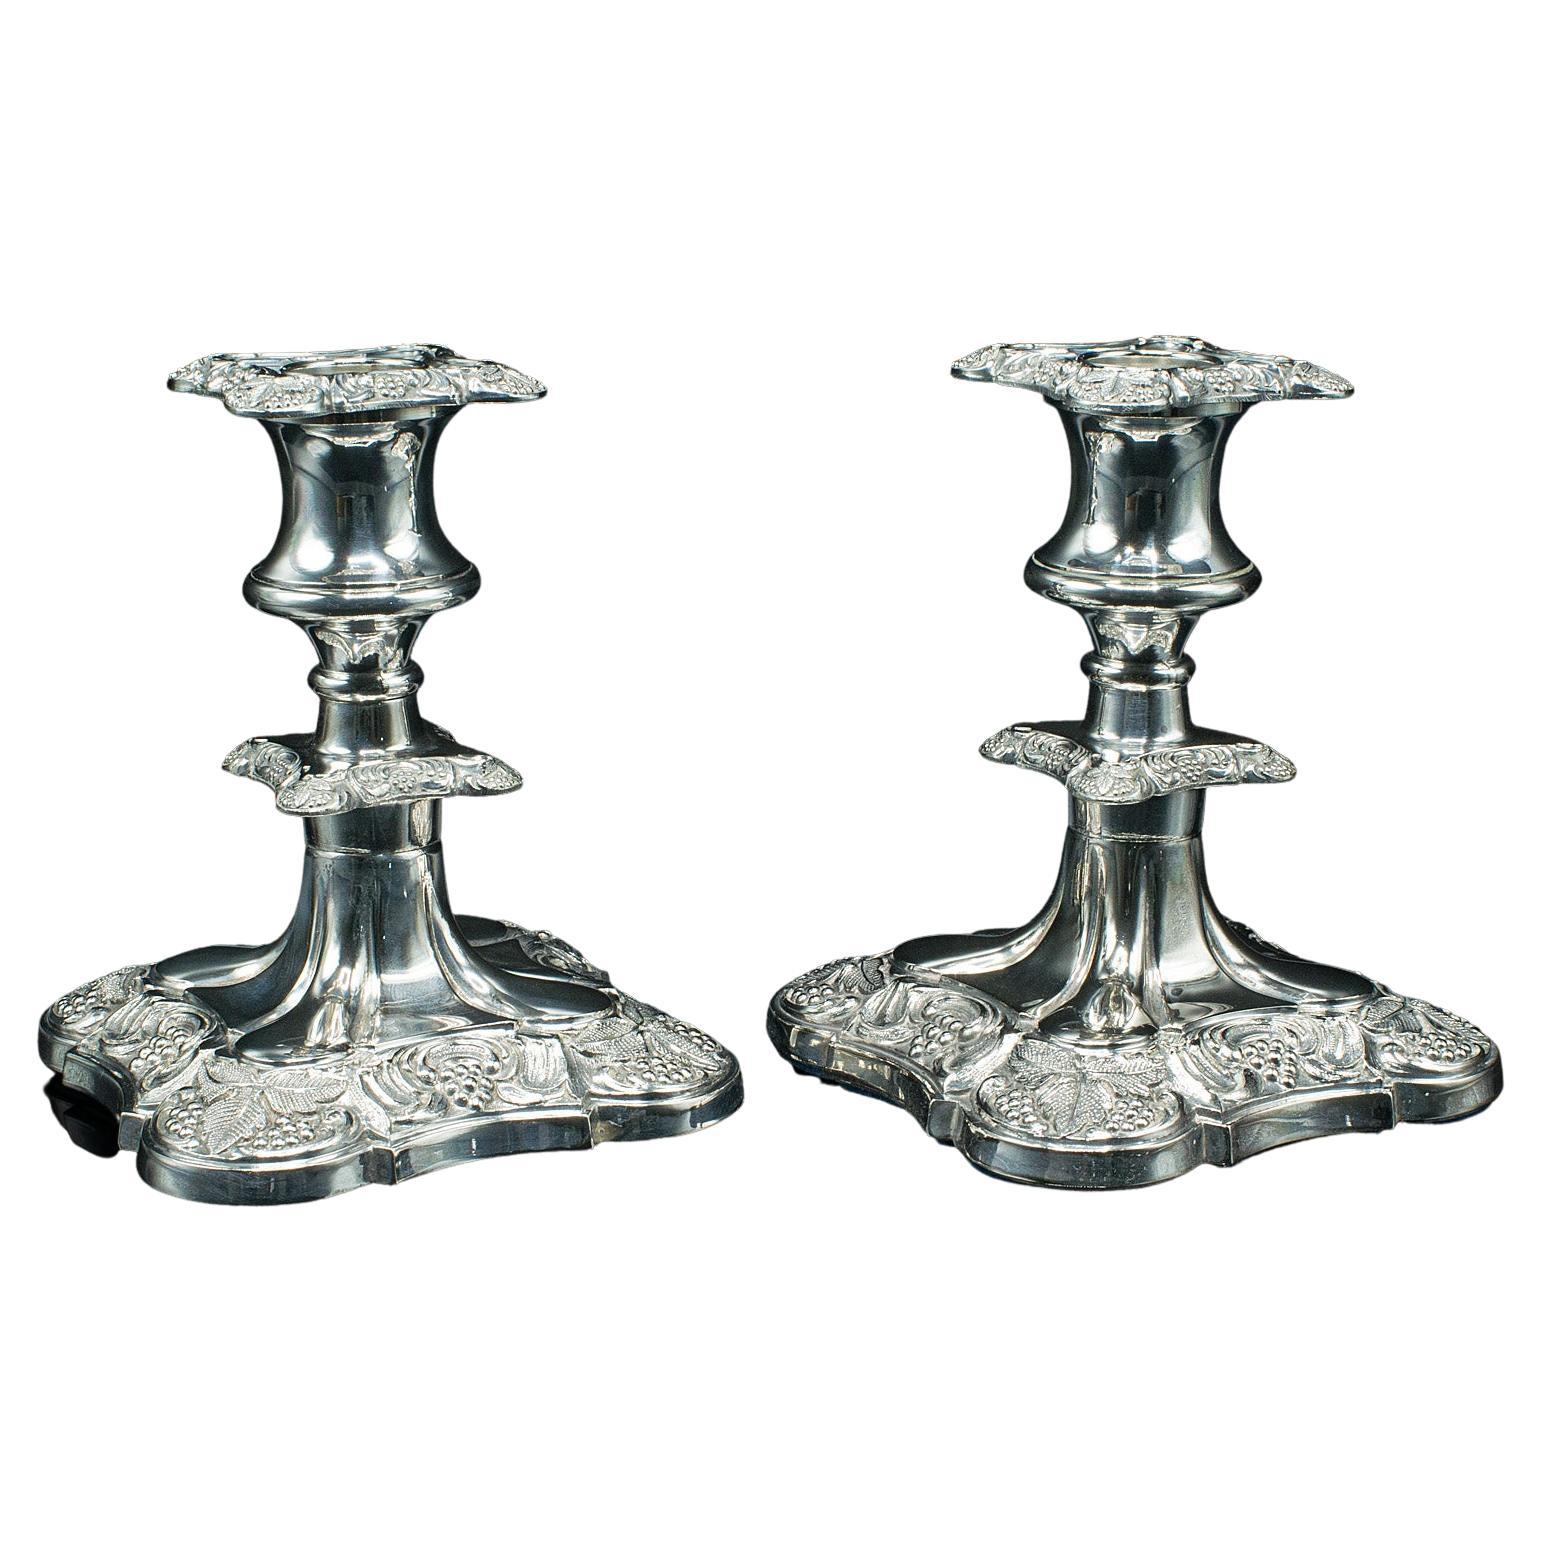 Pair of Antique Candlesticks, Silver Plate, Decorative, Candle Holder, Victorian